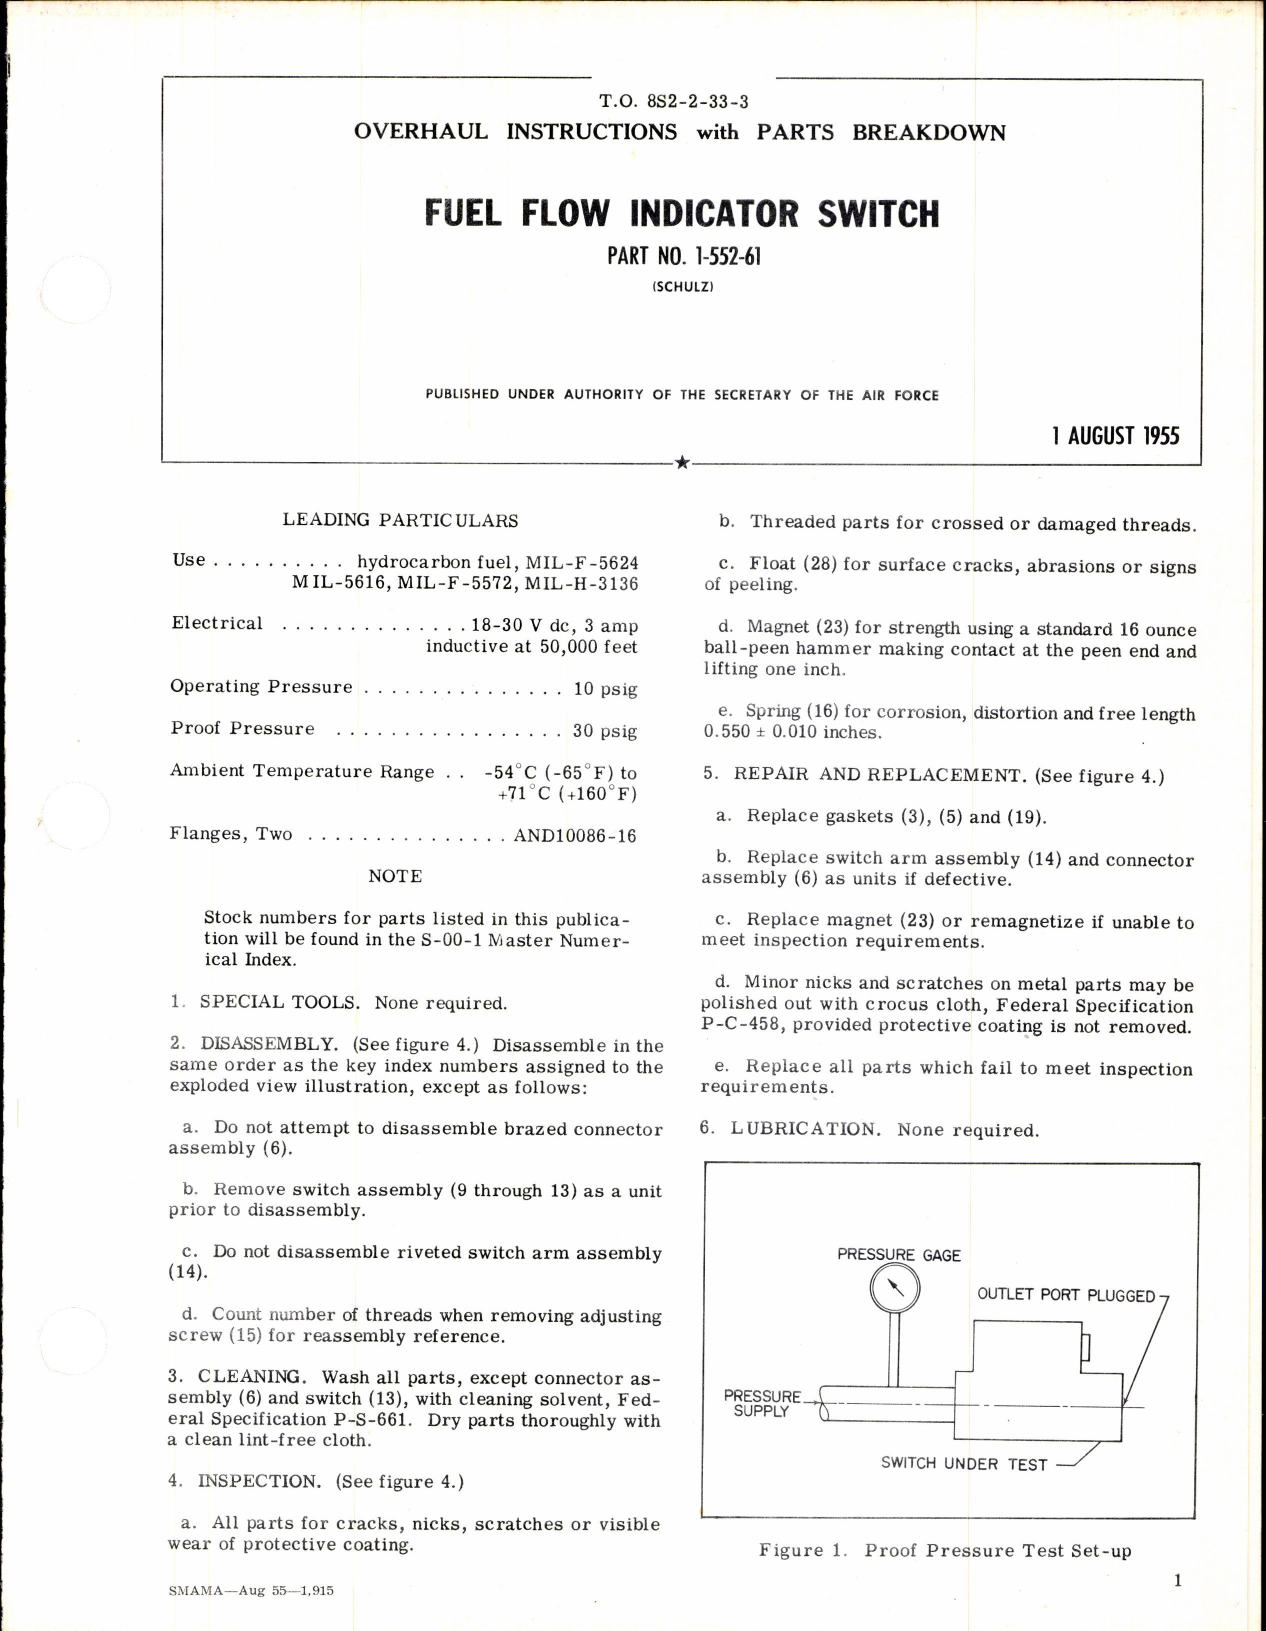 Sample page 1 from AirCorps Library document: Fuel Flow Indicator Switch Part No 1-552-61